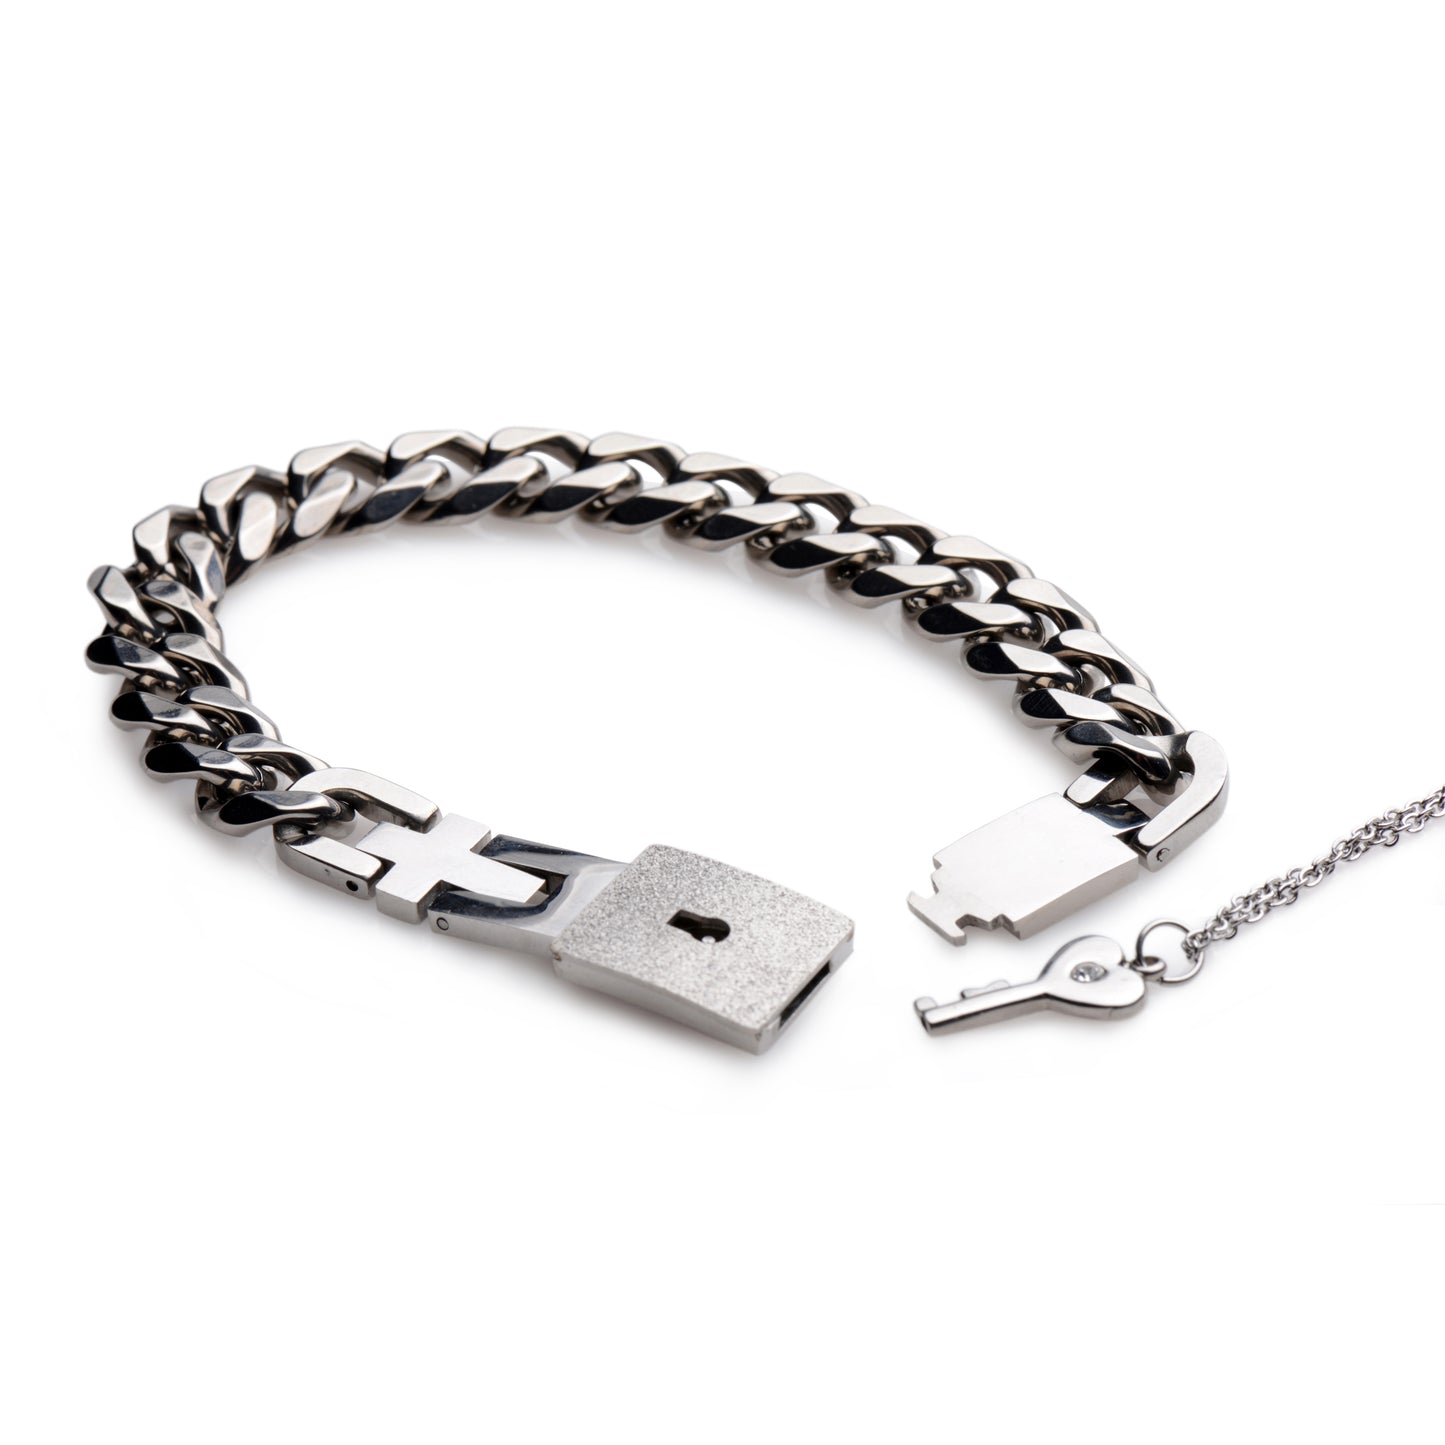 Chained Locking Bracelet And Key Necklace